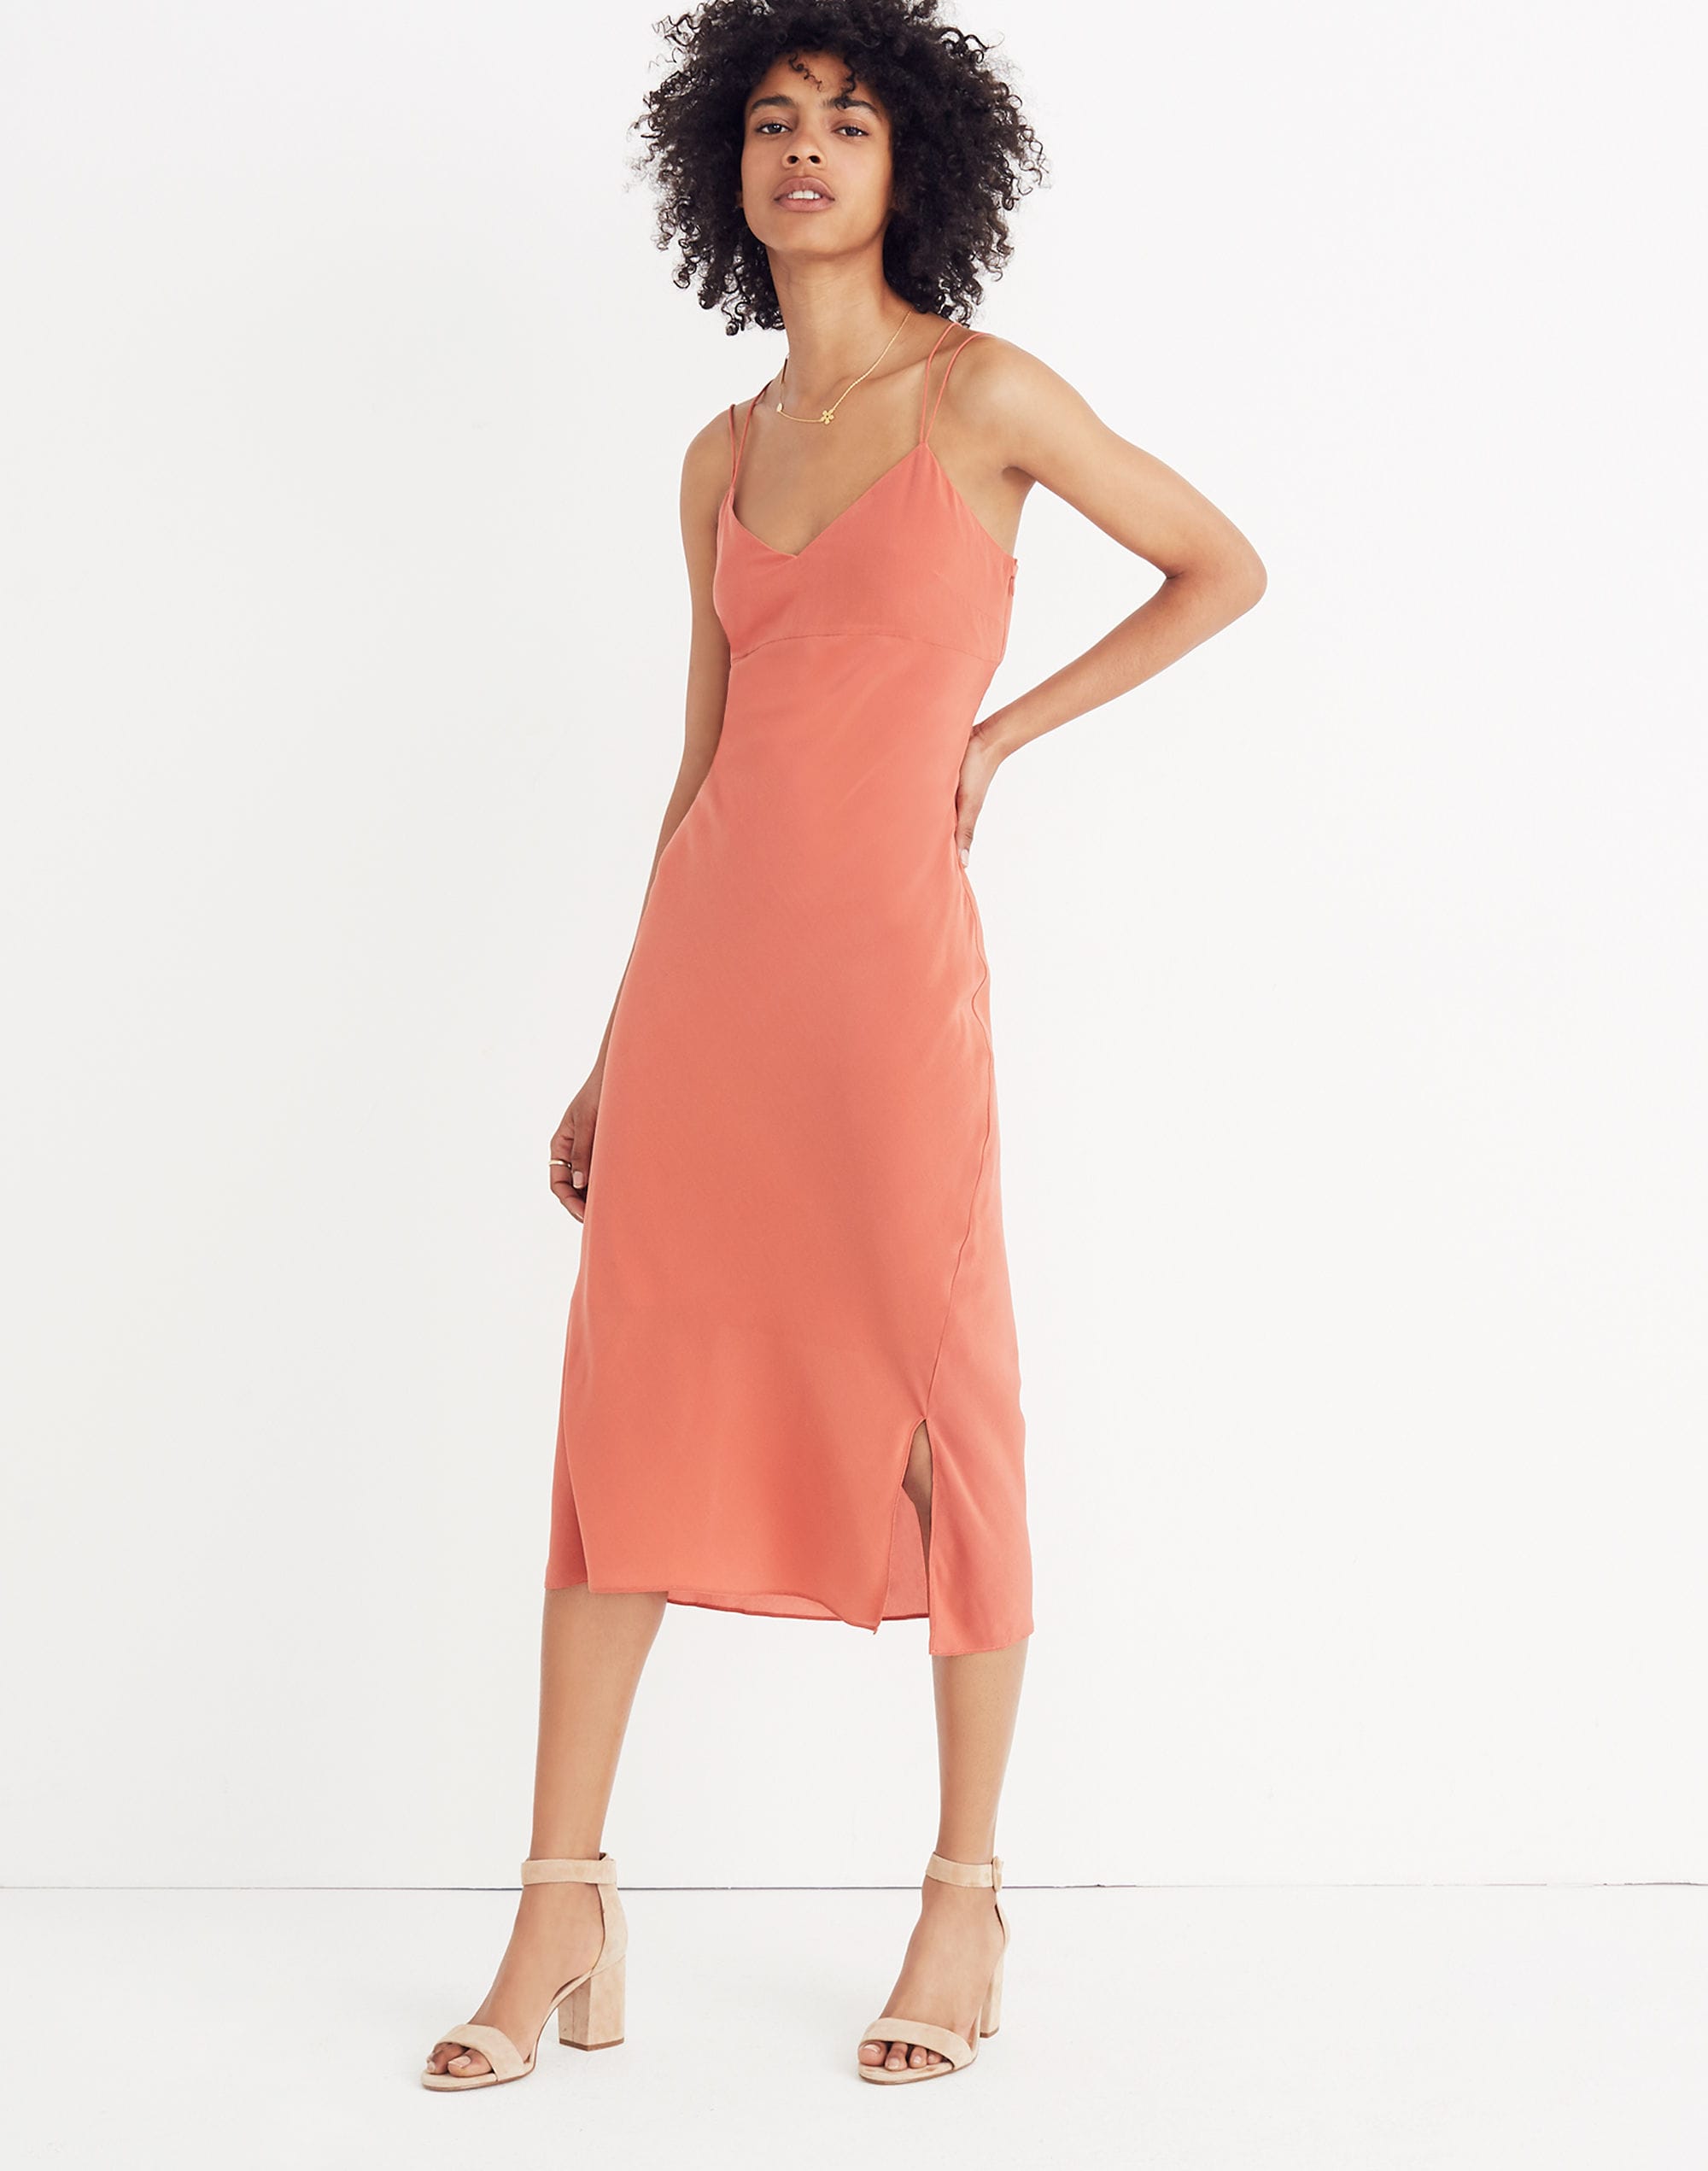 7 Slip Dresses For Summer Made From Natural Materials - The Good Trade